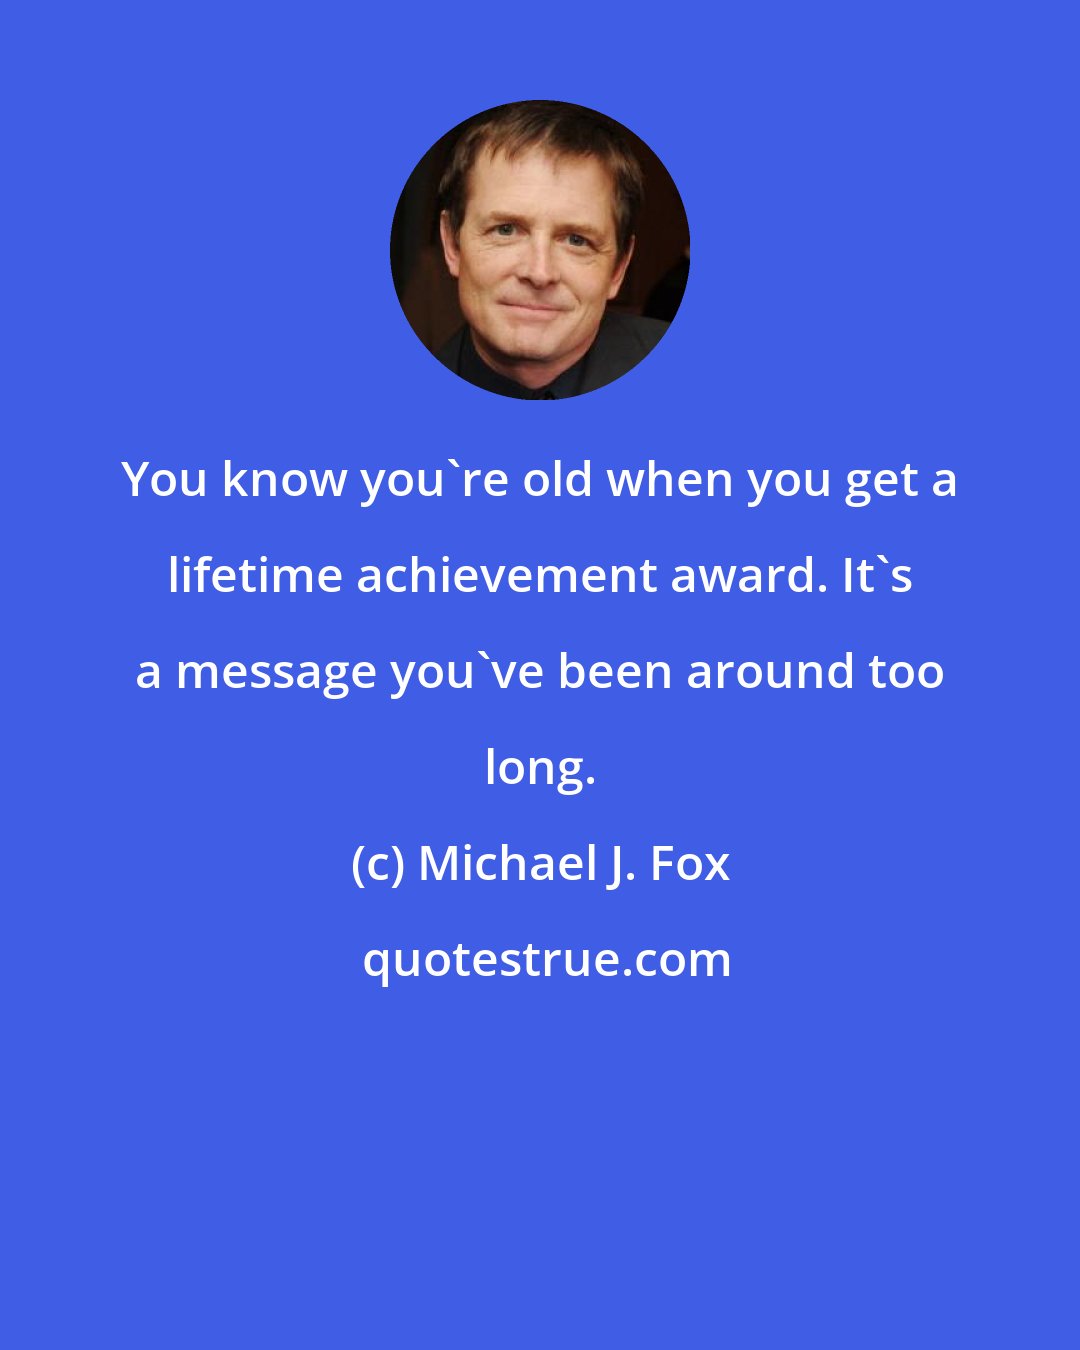 Michael J. Fox: You know you're old when you get a lifetime achievement award. It's a message you've been around too long.